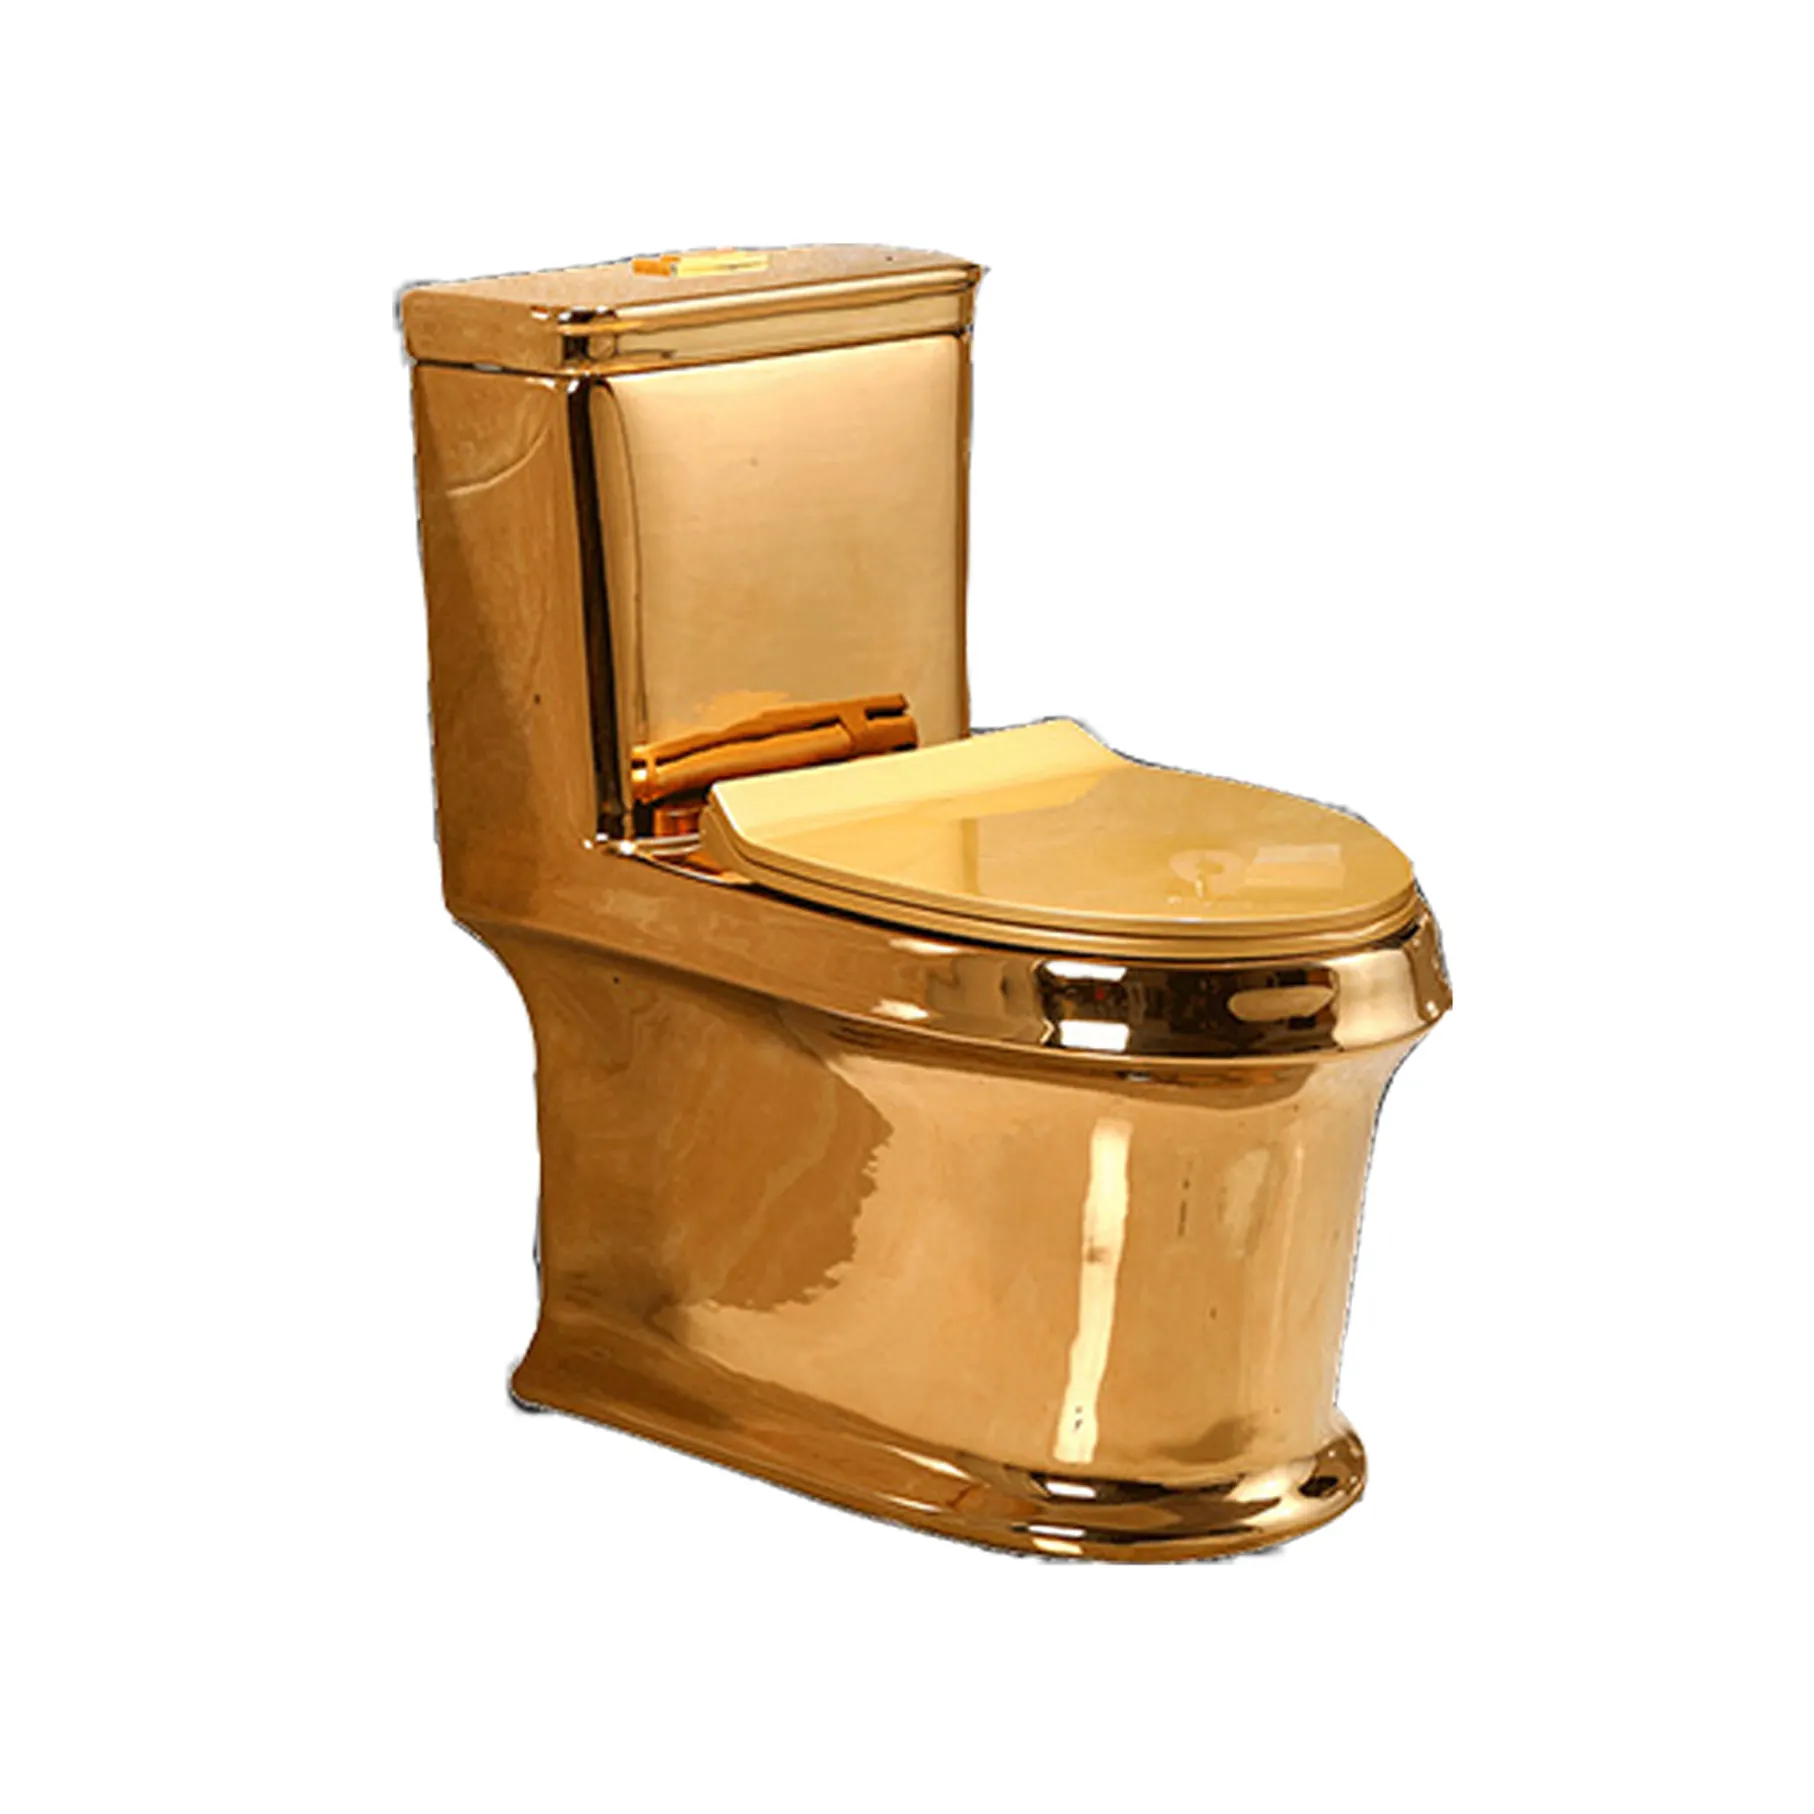 Sanitary Ware Bathroom Ceramic Golden Color One Piece Toilet Gold Plated Toilet